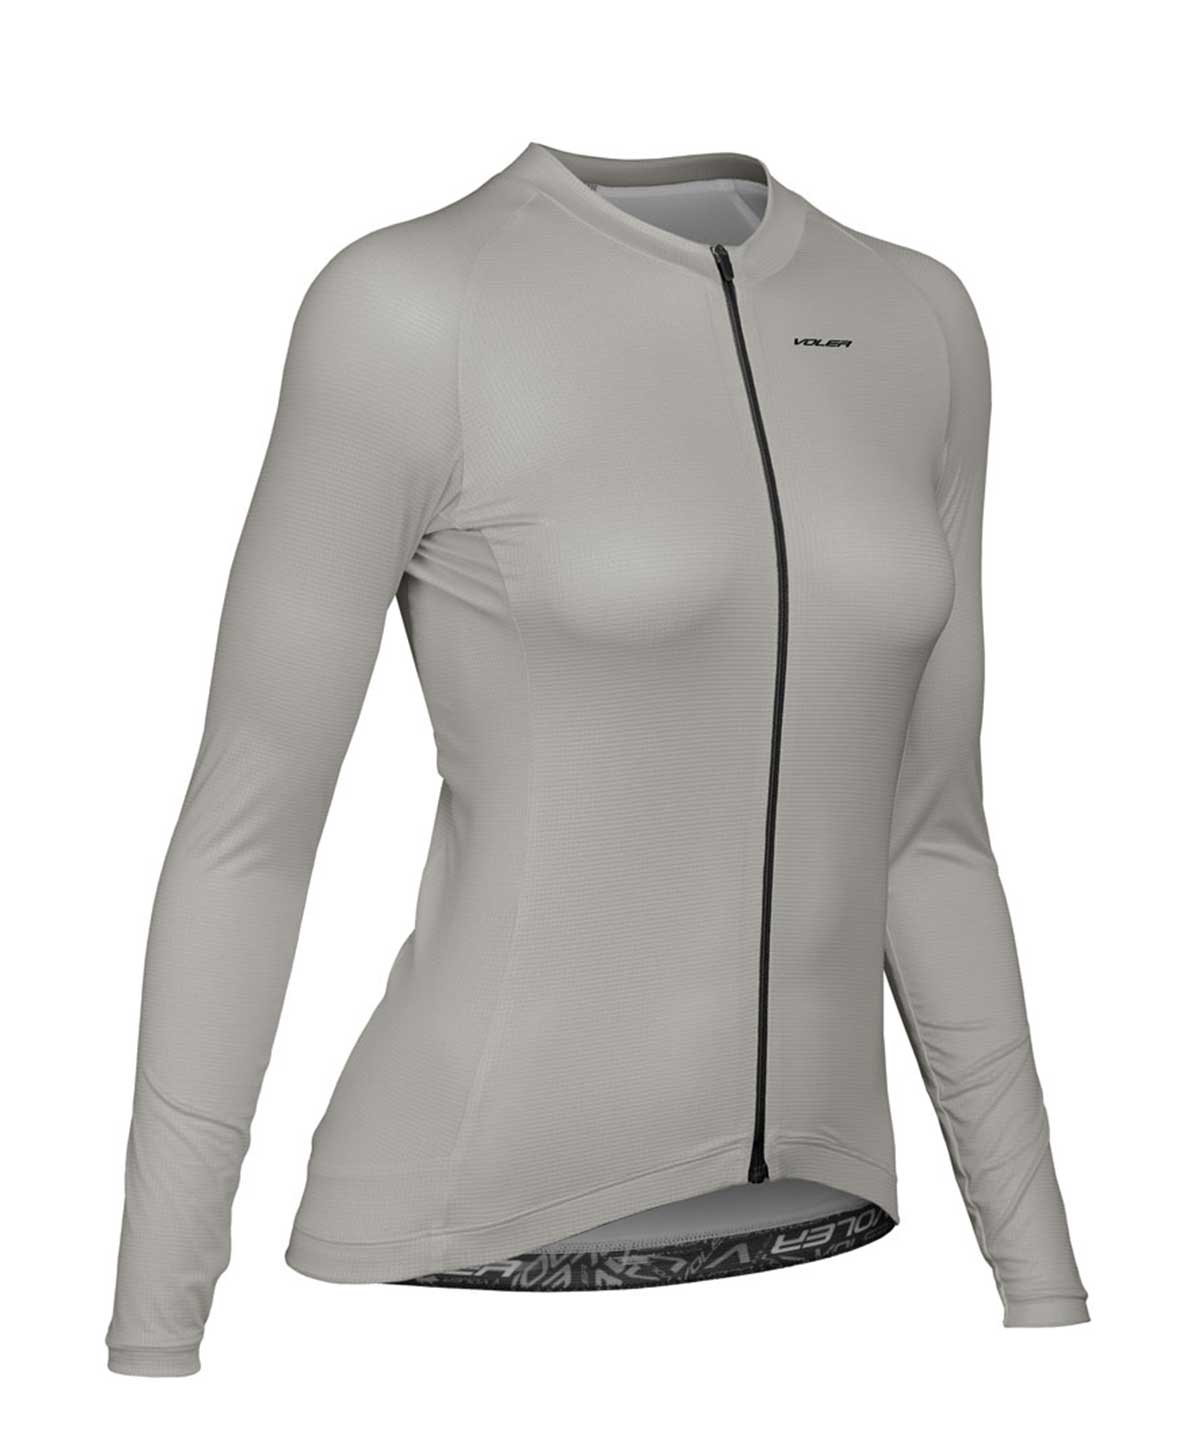 W. VELOCITY AIR LS JERSEY - SOLID